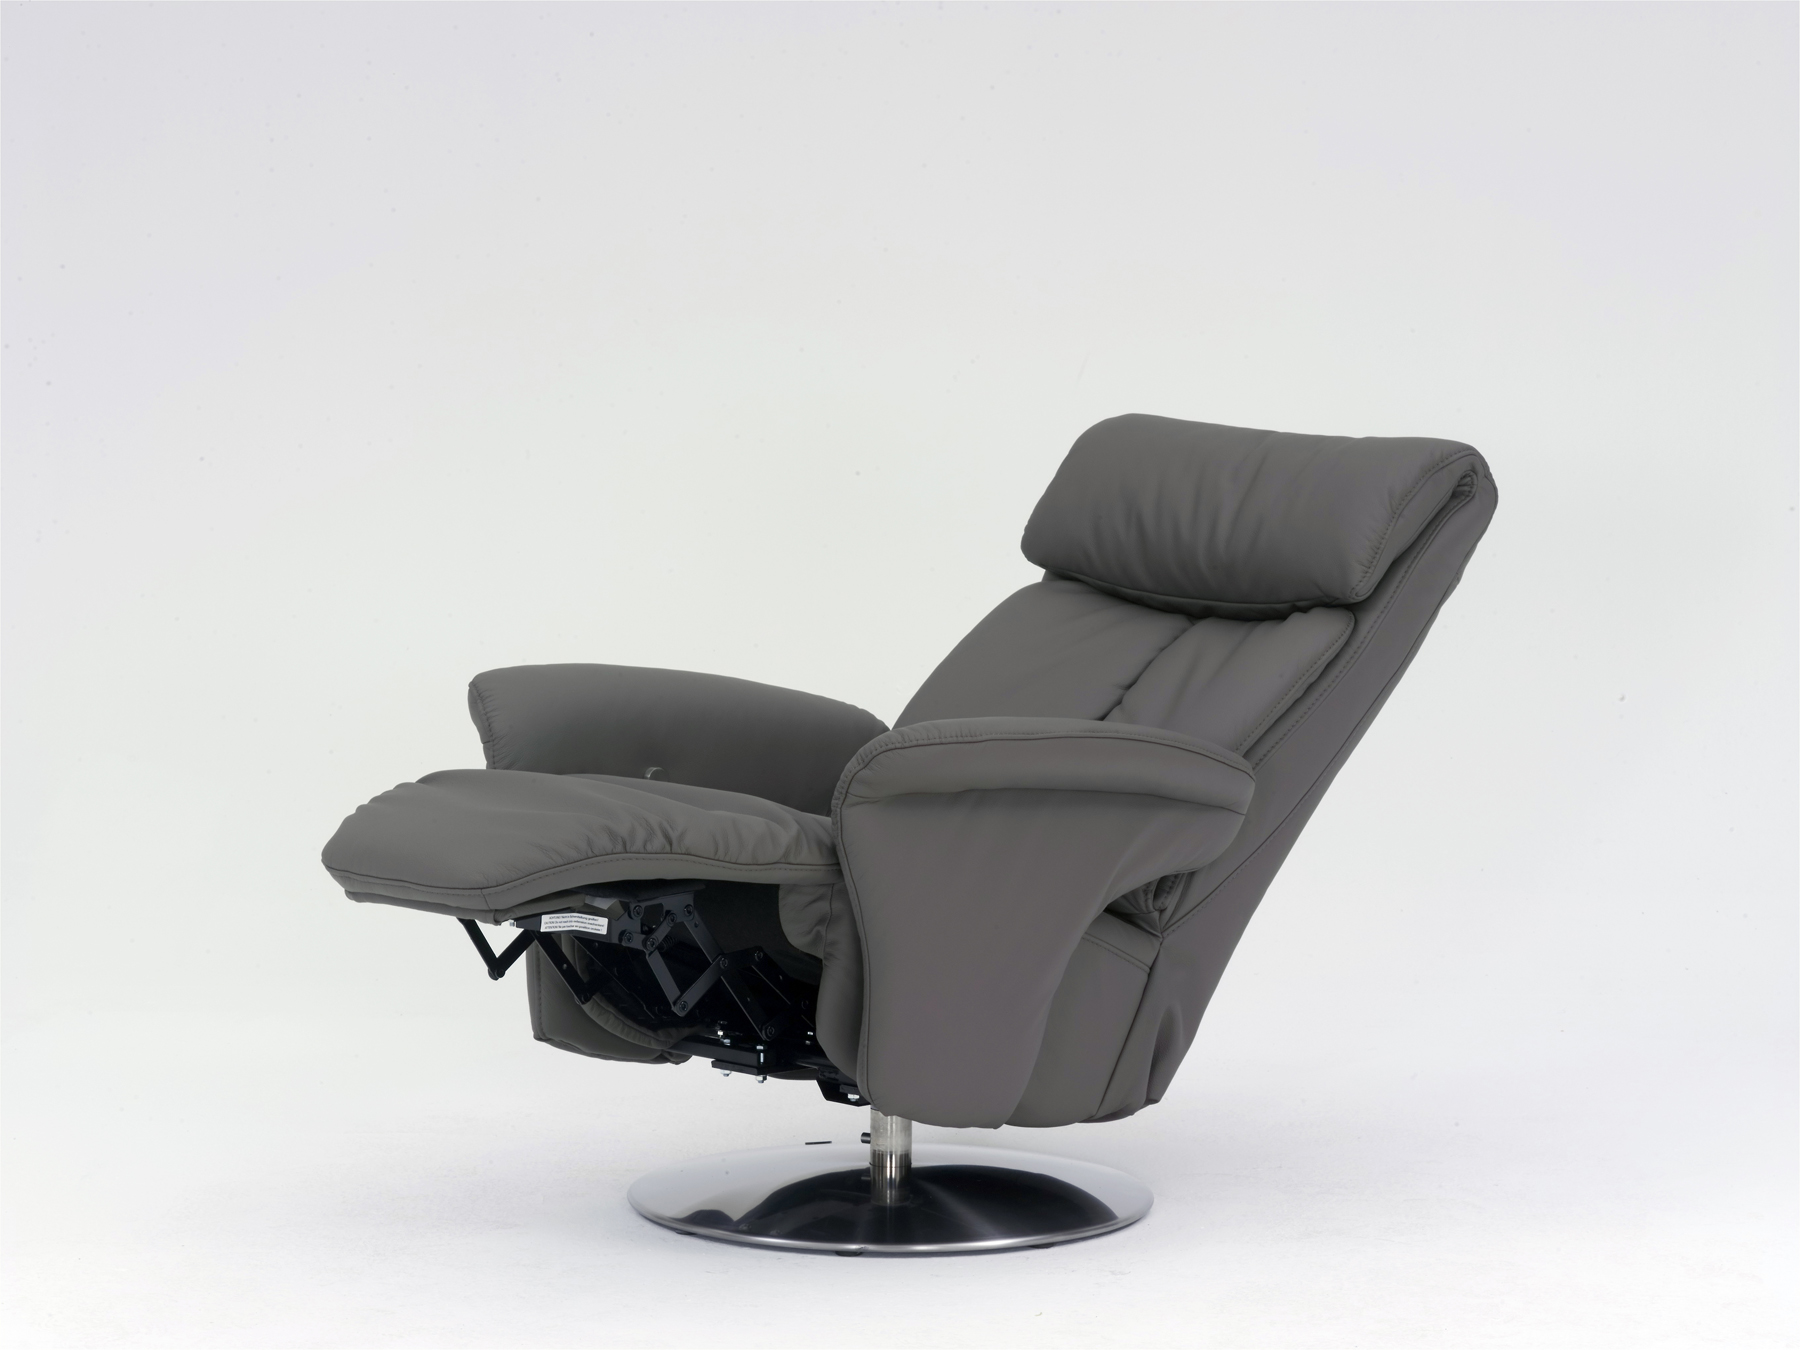 HIMOLLA SINARTRA GREY LEATHER CHAIR RECLINED